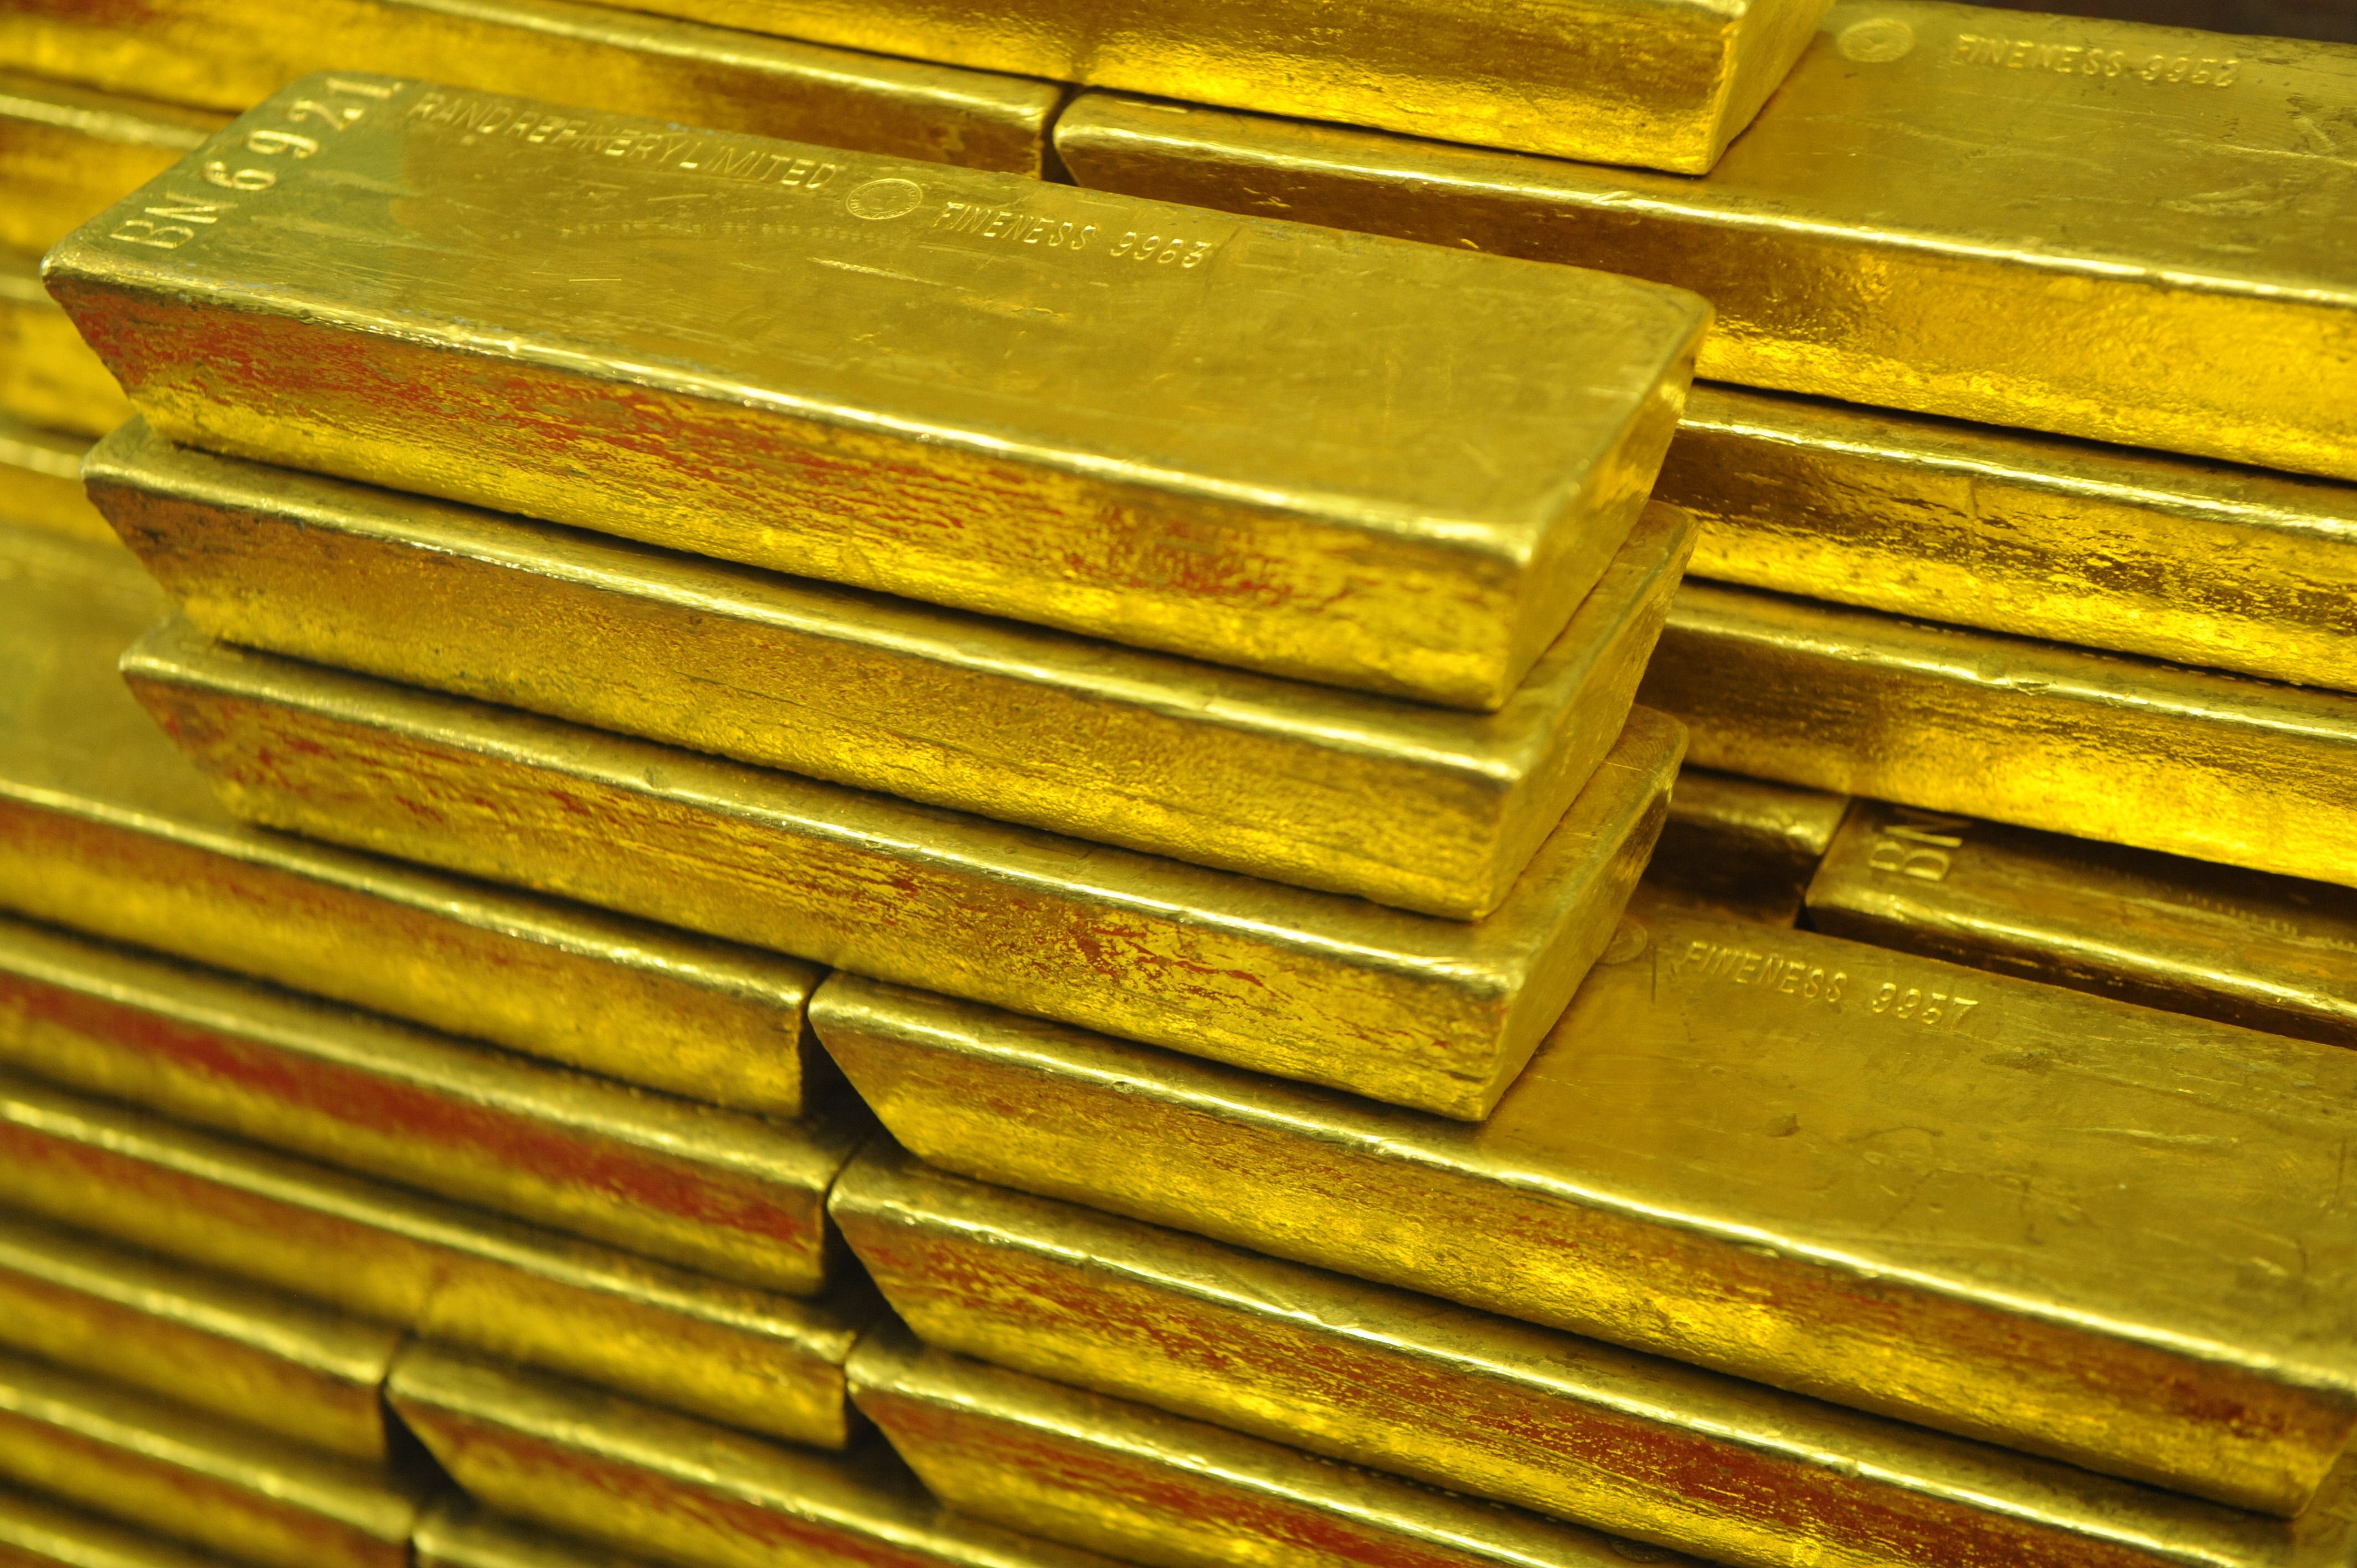 Emerging markets should go for the gold